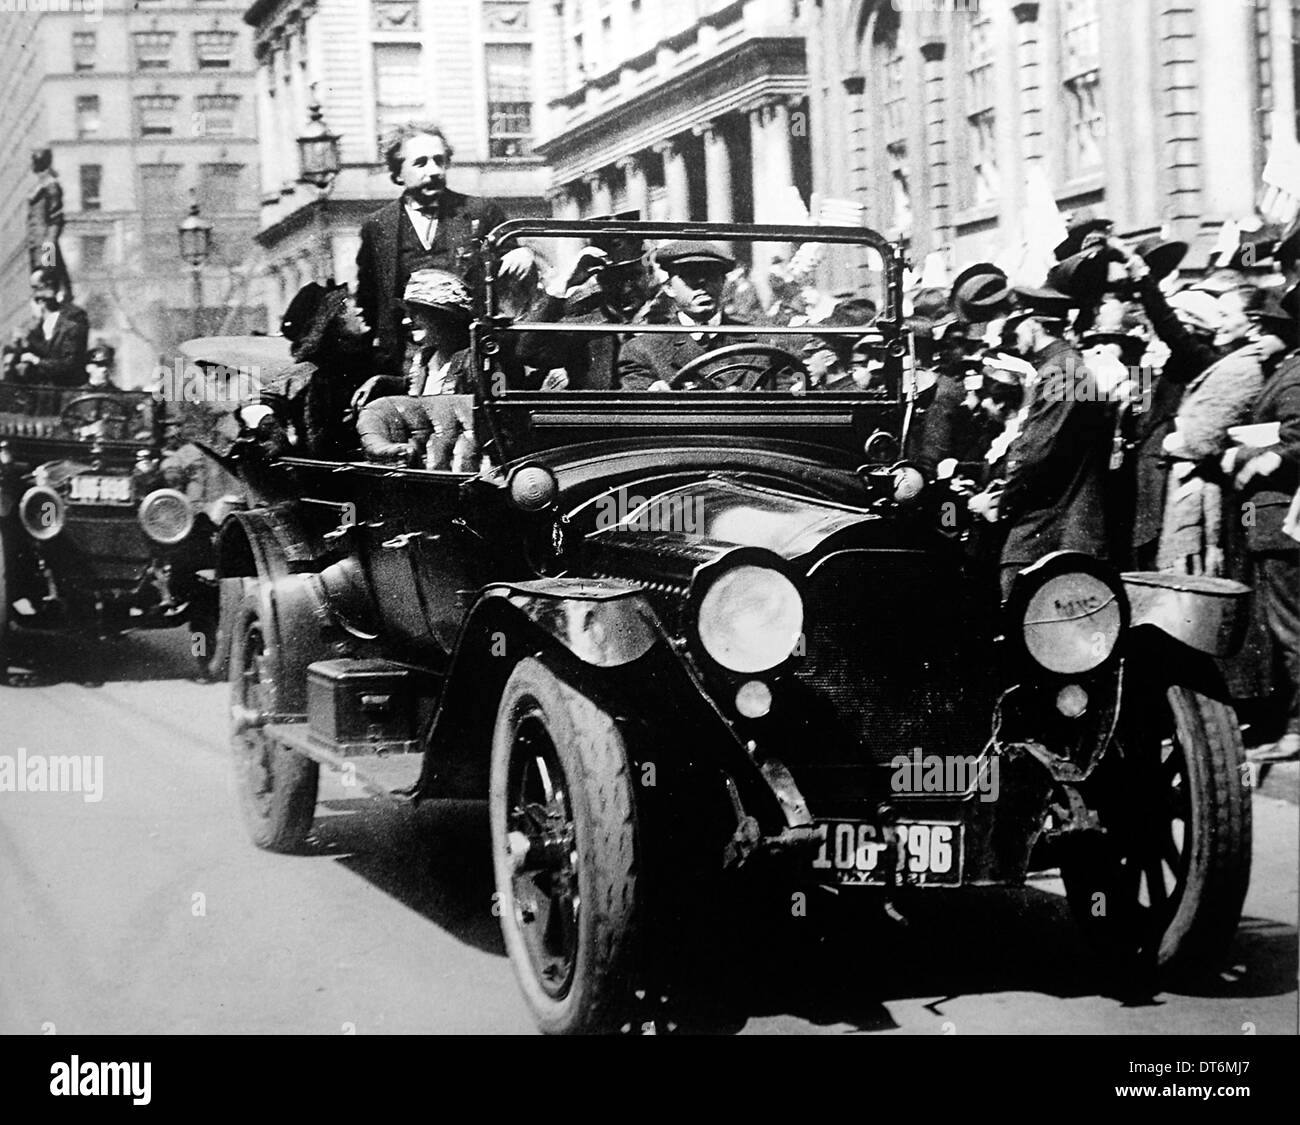 ALBERT EINSTEIN (1879-1955) German-American theoretical physicist is welcomed on his first visit to New York in 1921. Stock Photo